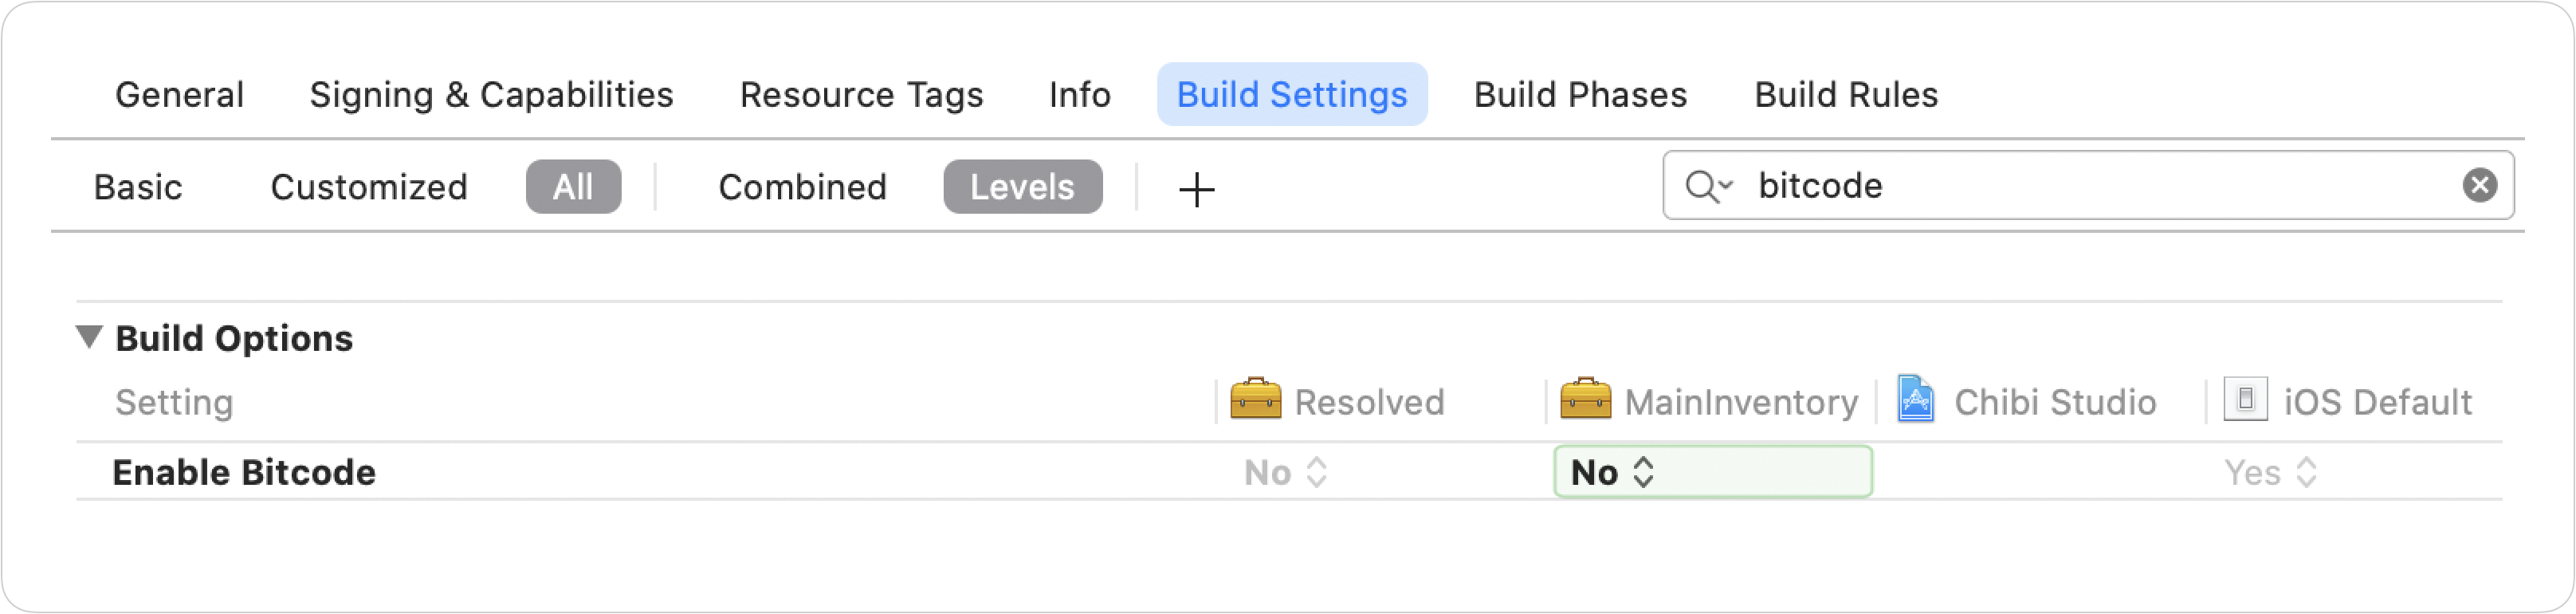 Screenshot showing Xcode’s build settings editor with the “enable bitcode” setting turned off